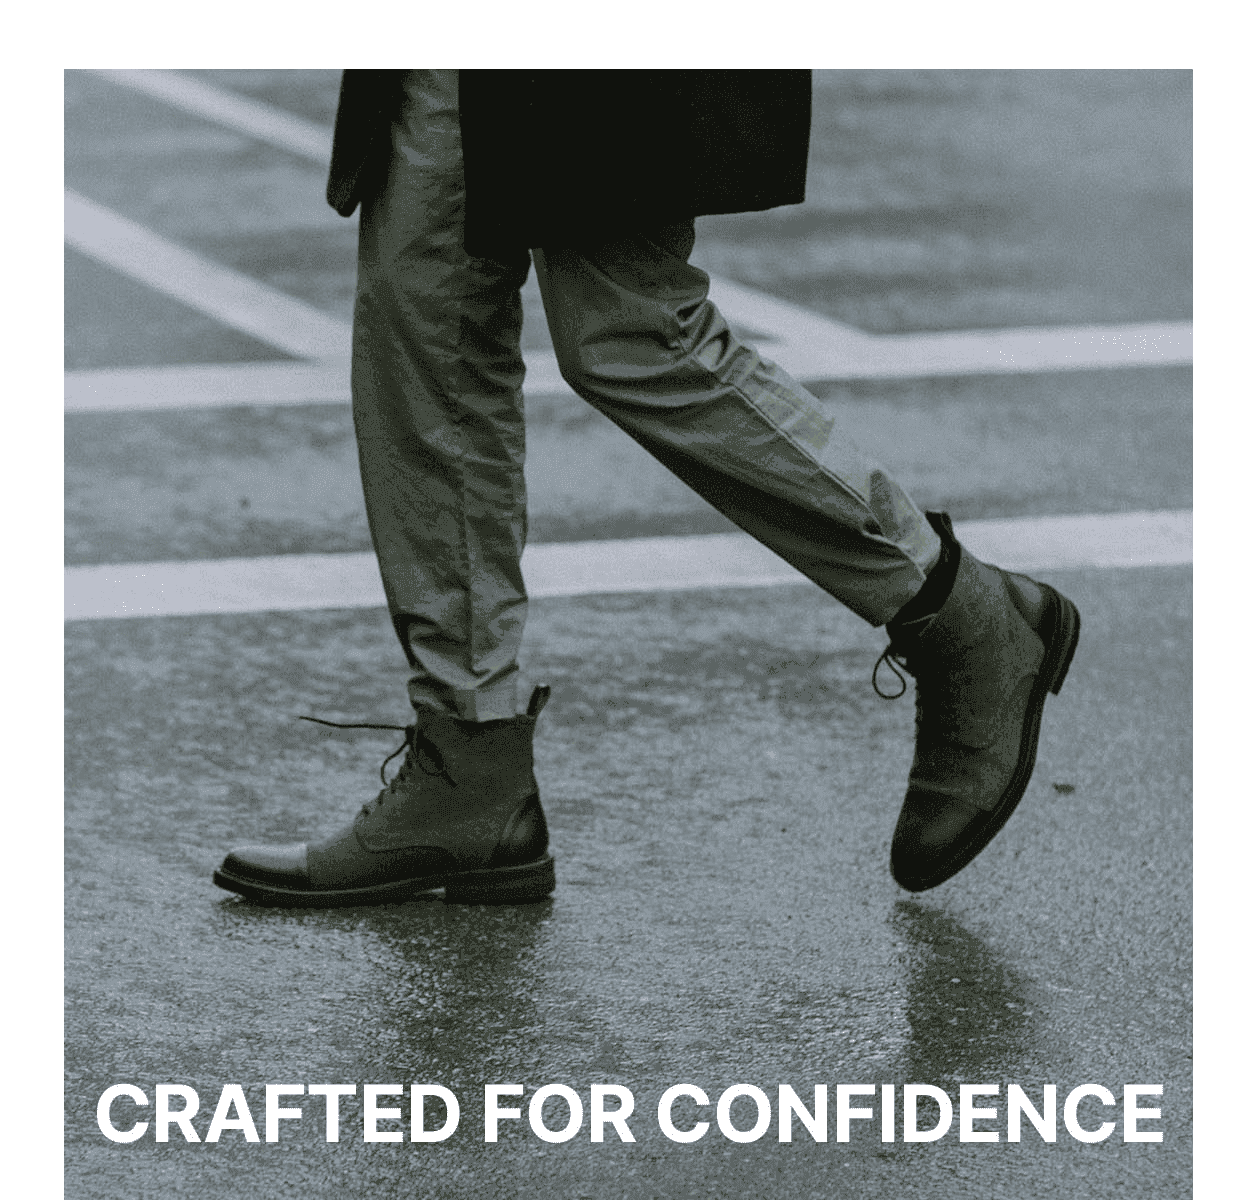 CRAFTED FOR CONFIDENCE